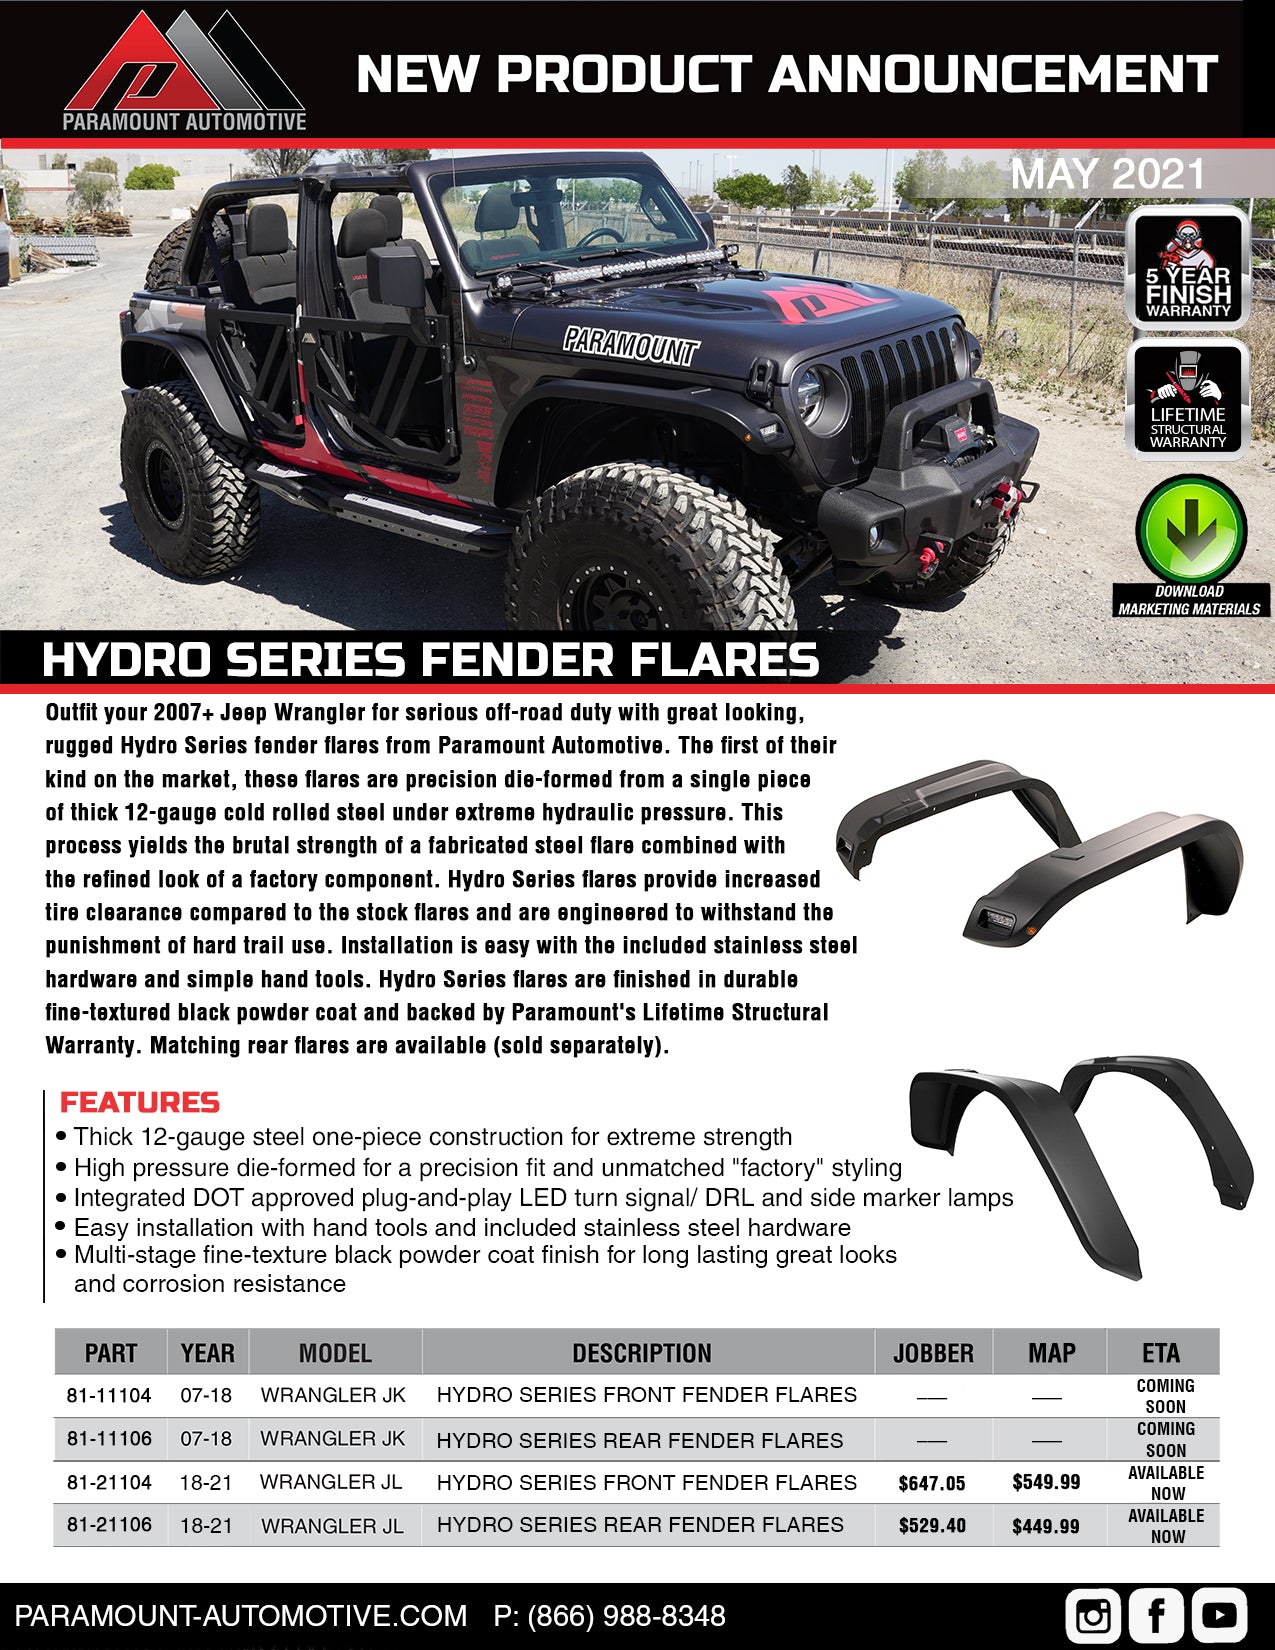 NEW HYDRO SERIES FENDER FLARES